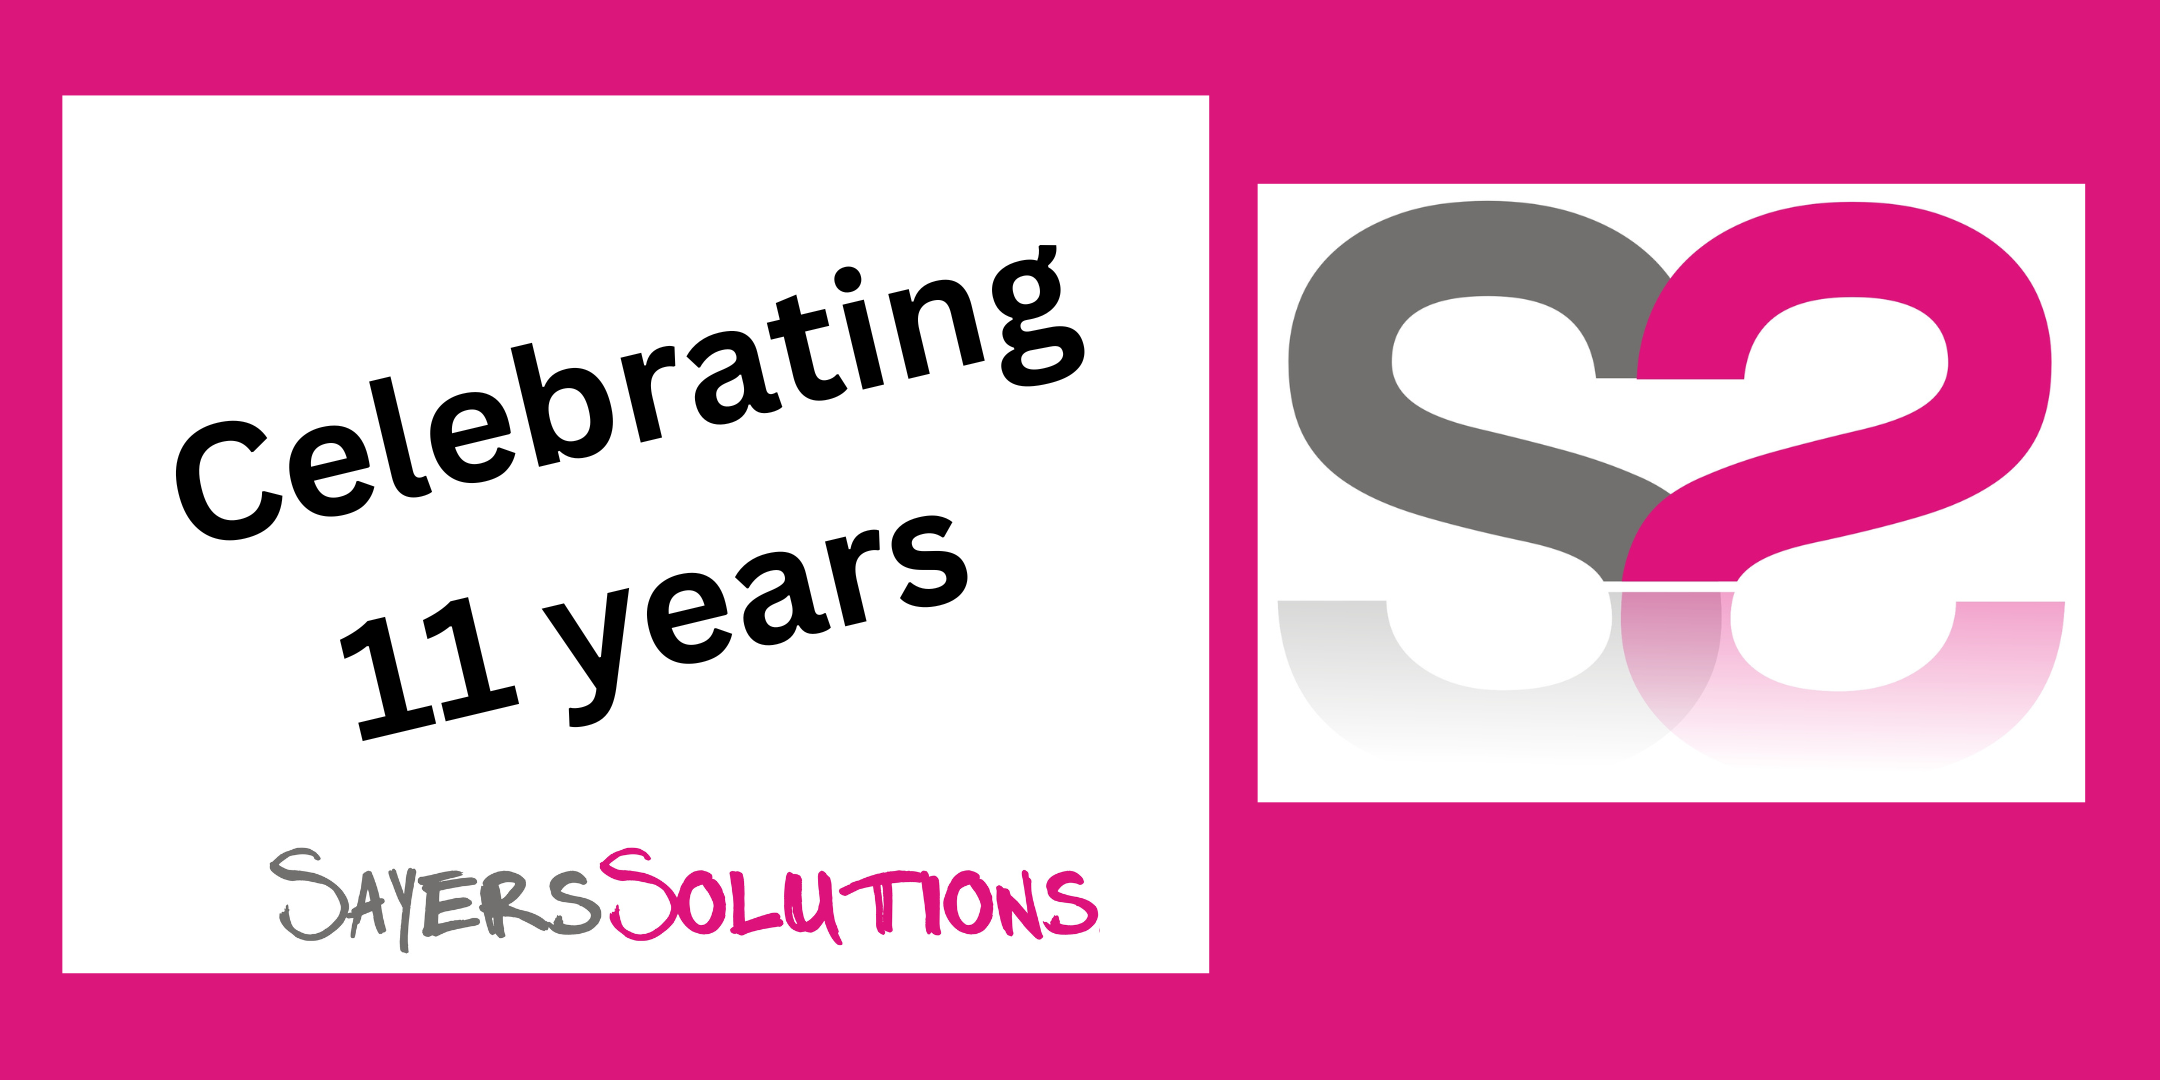 Celebrating 11 years of Sayers Solutions